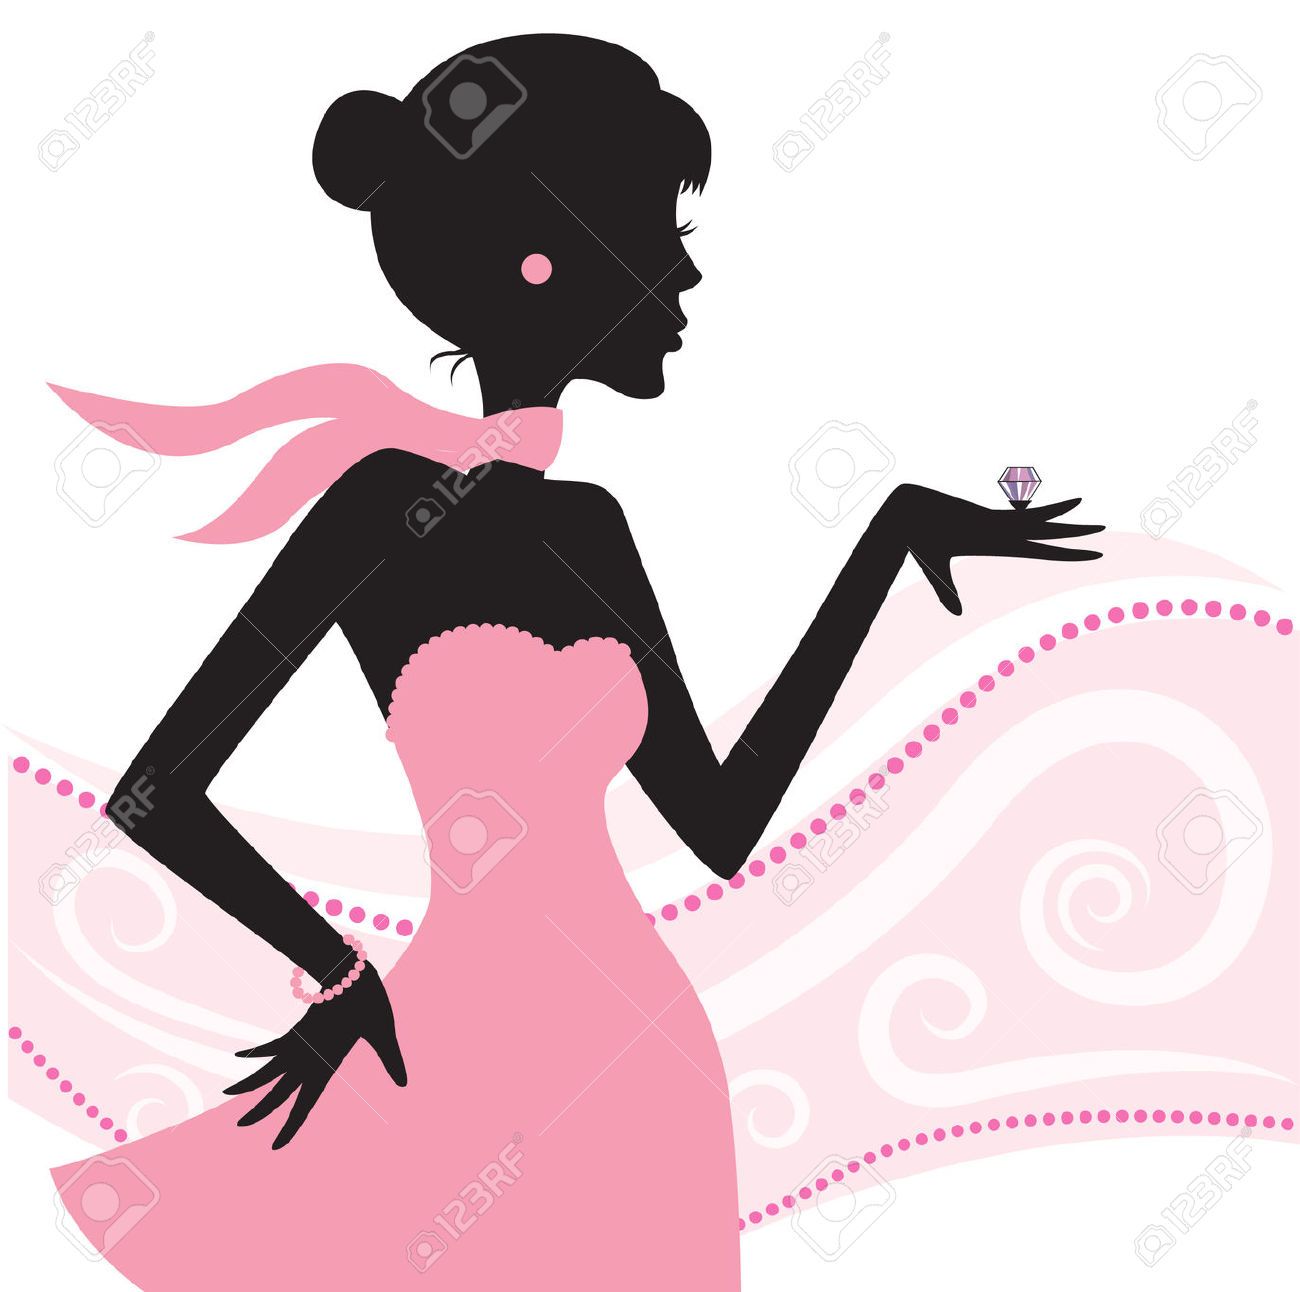 Jewelry lady clipart clipart images gallery for free